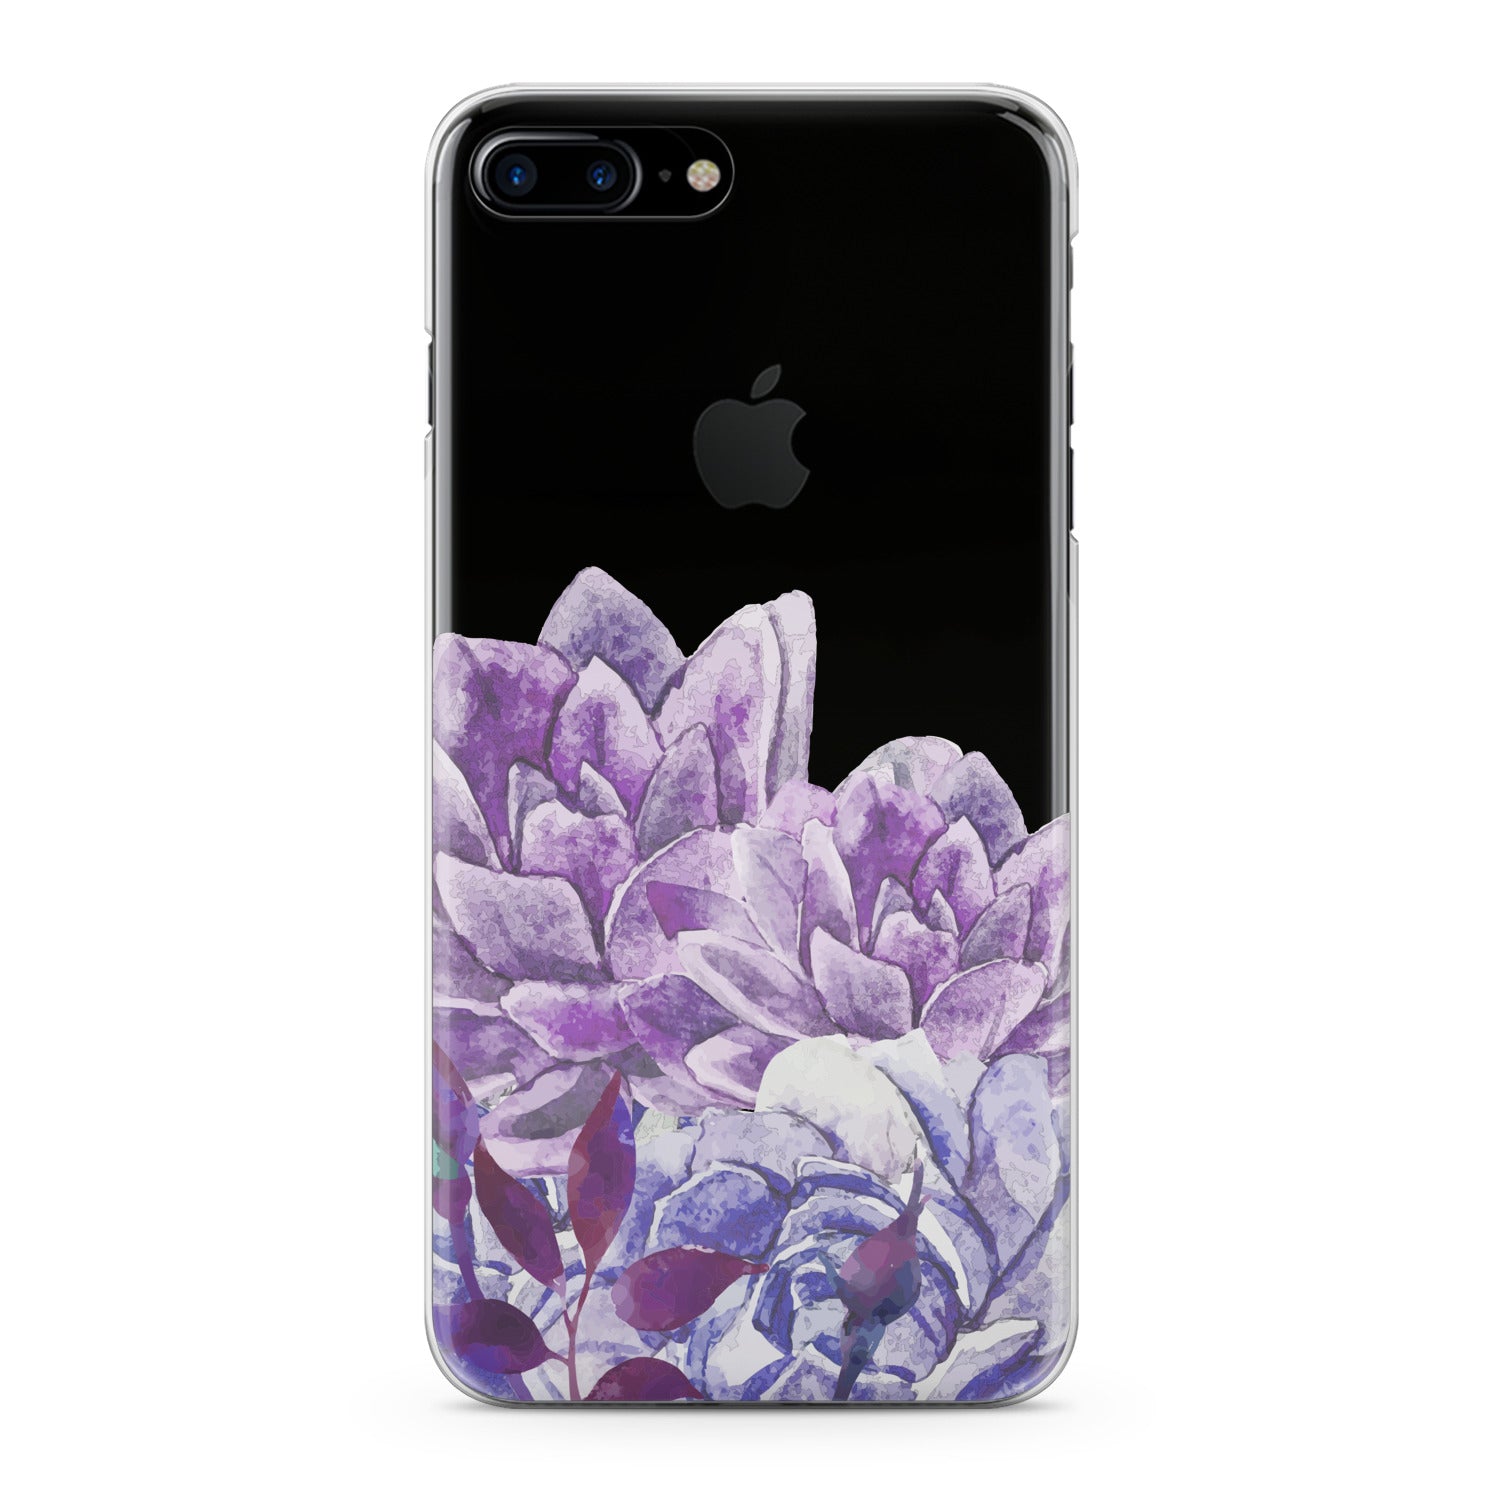 Lex Altern Awesome Purple Flowers Phone Case for your iPhone & Android phone.